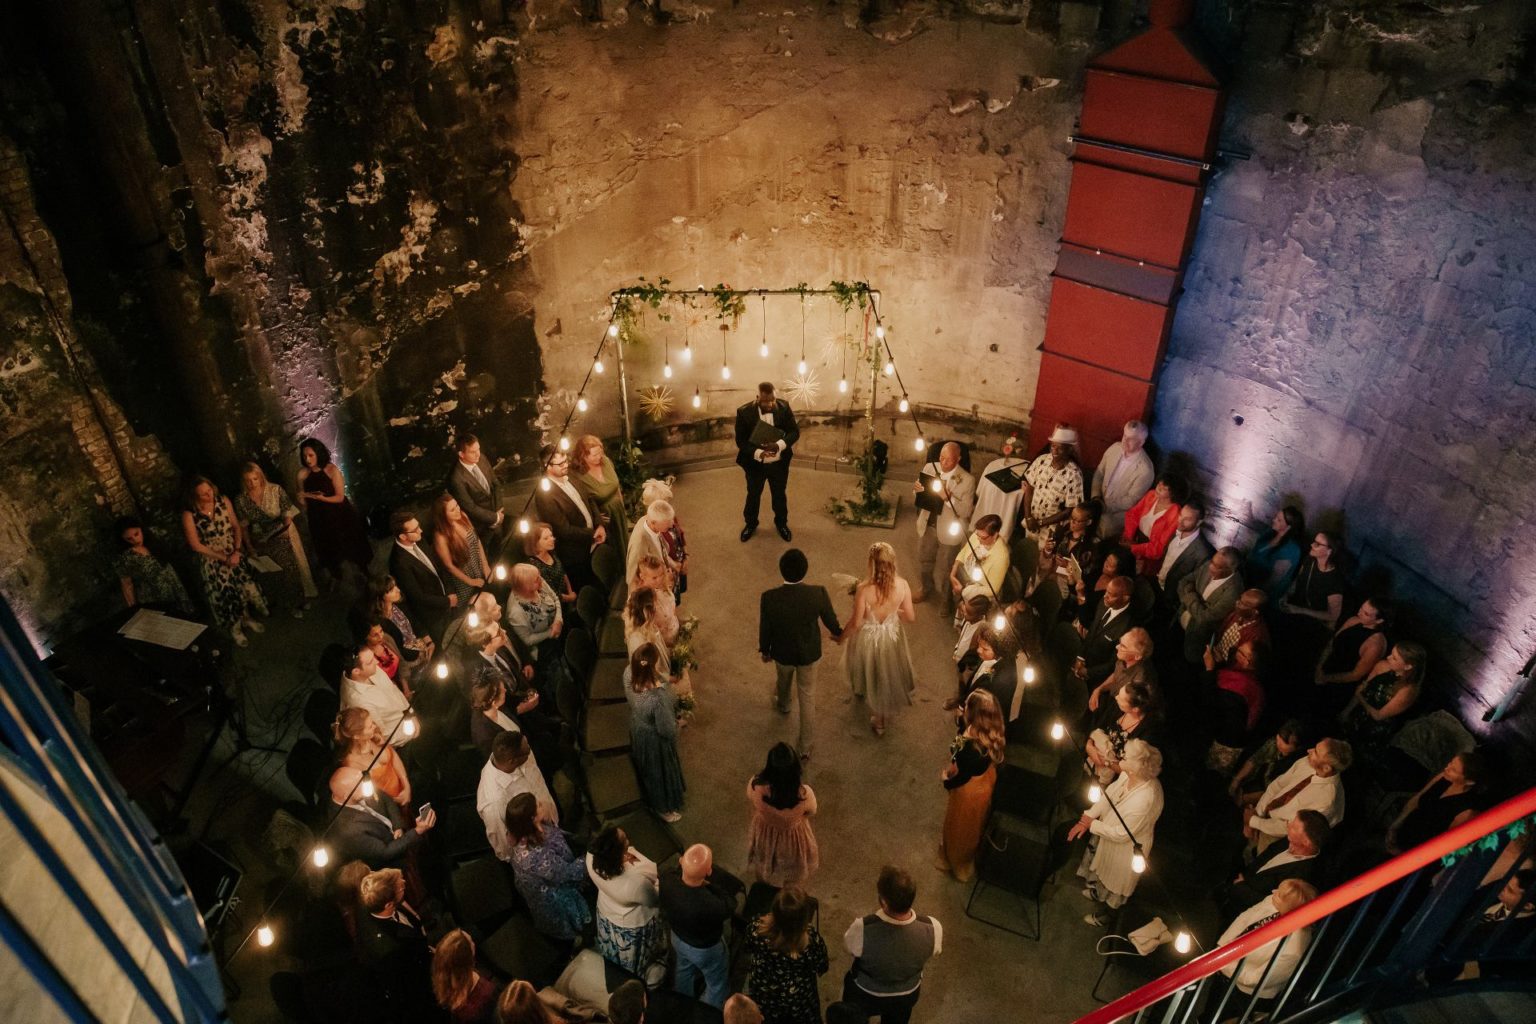 Bride and groom holding hands in front of a registrar for their wedding at Brunel Museum Tunnel Shaft. The background is concrete walls with festoon lights and guests standing in a semi circle